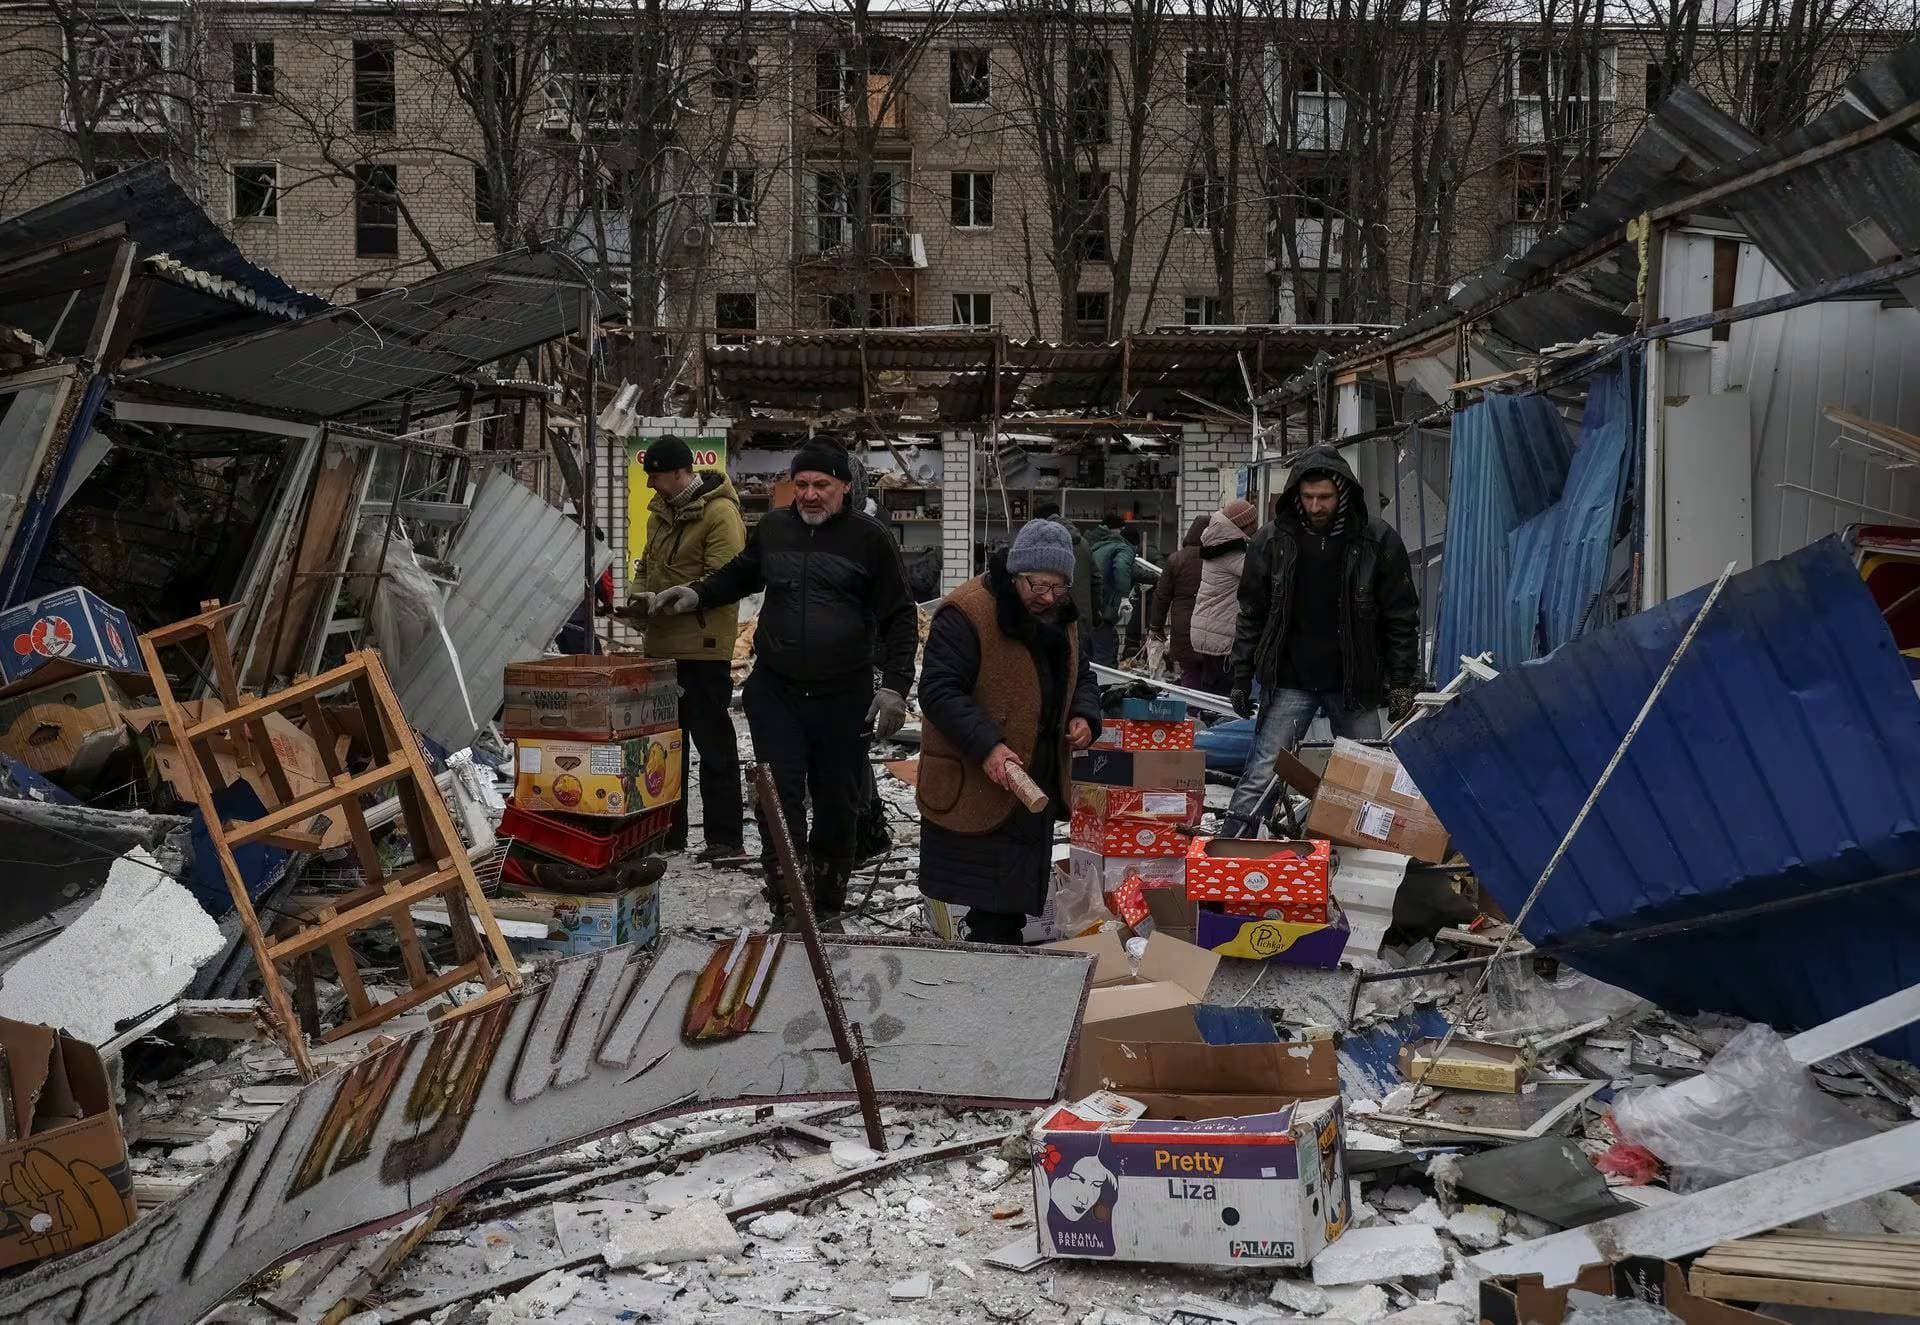 Residents collect goods at a street market destroyed during a Russian missile attack in Kharkiv